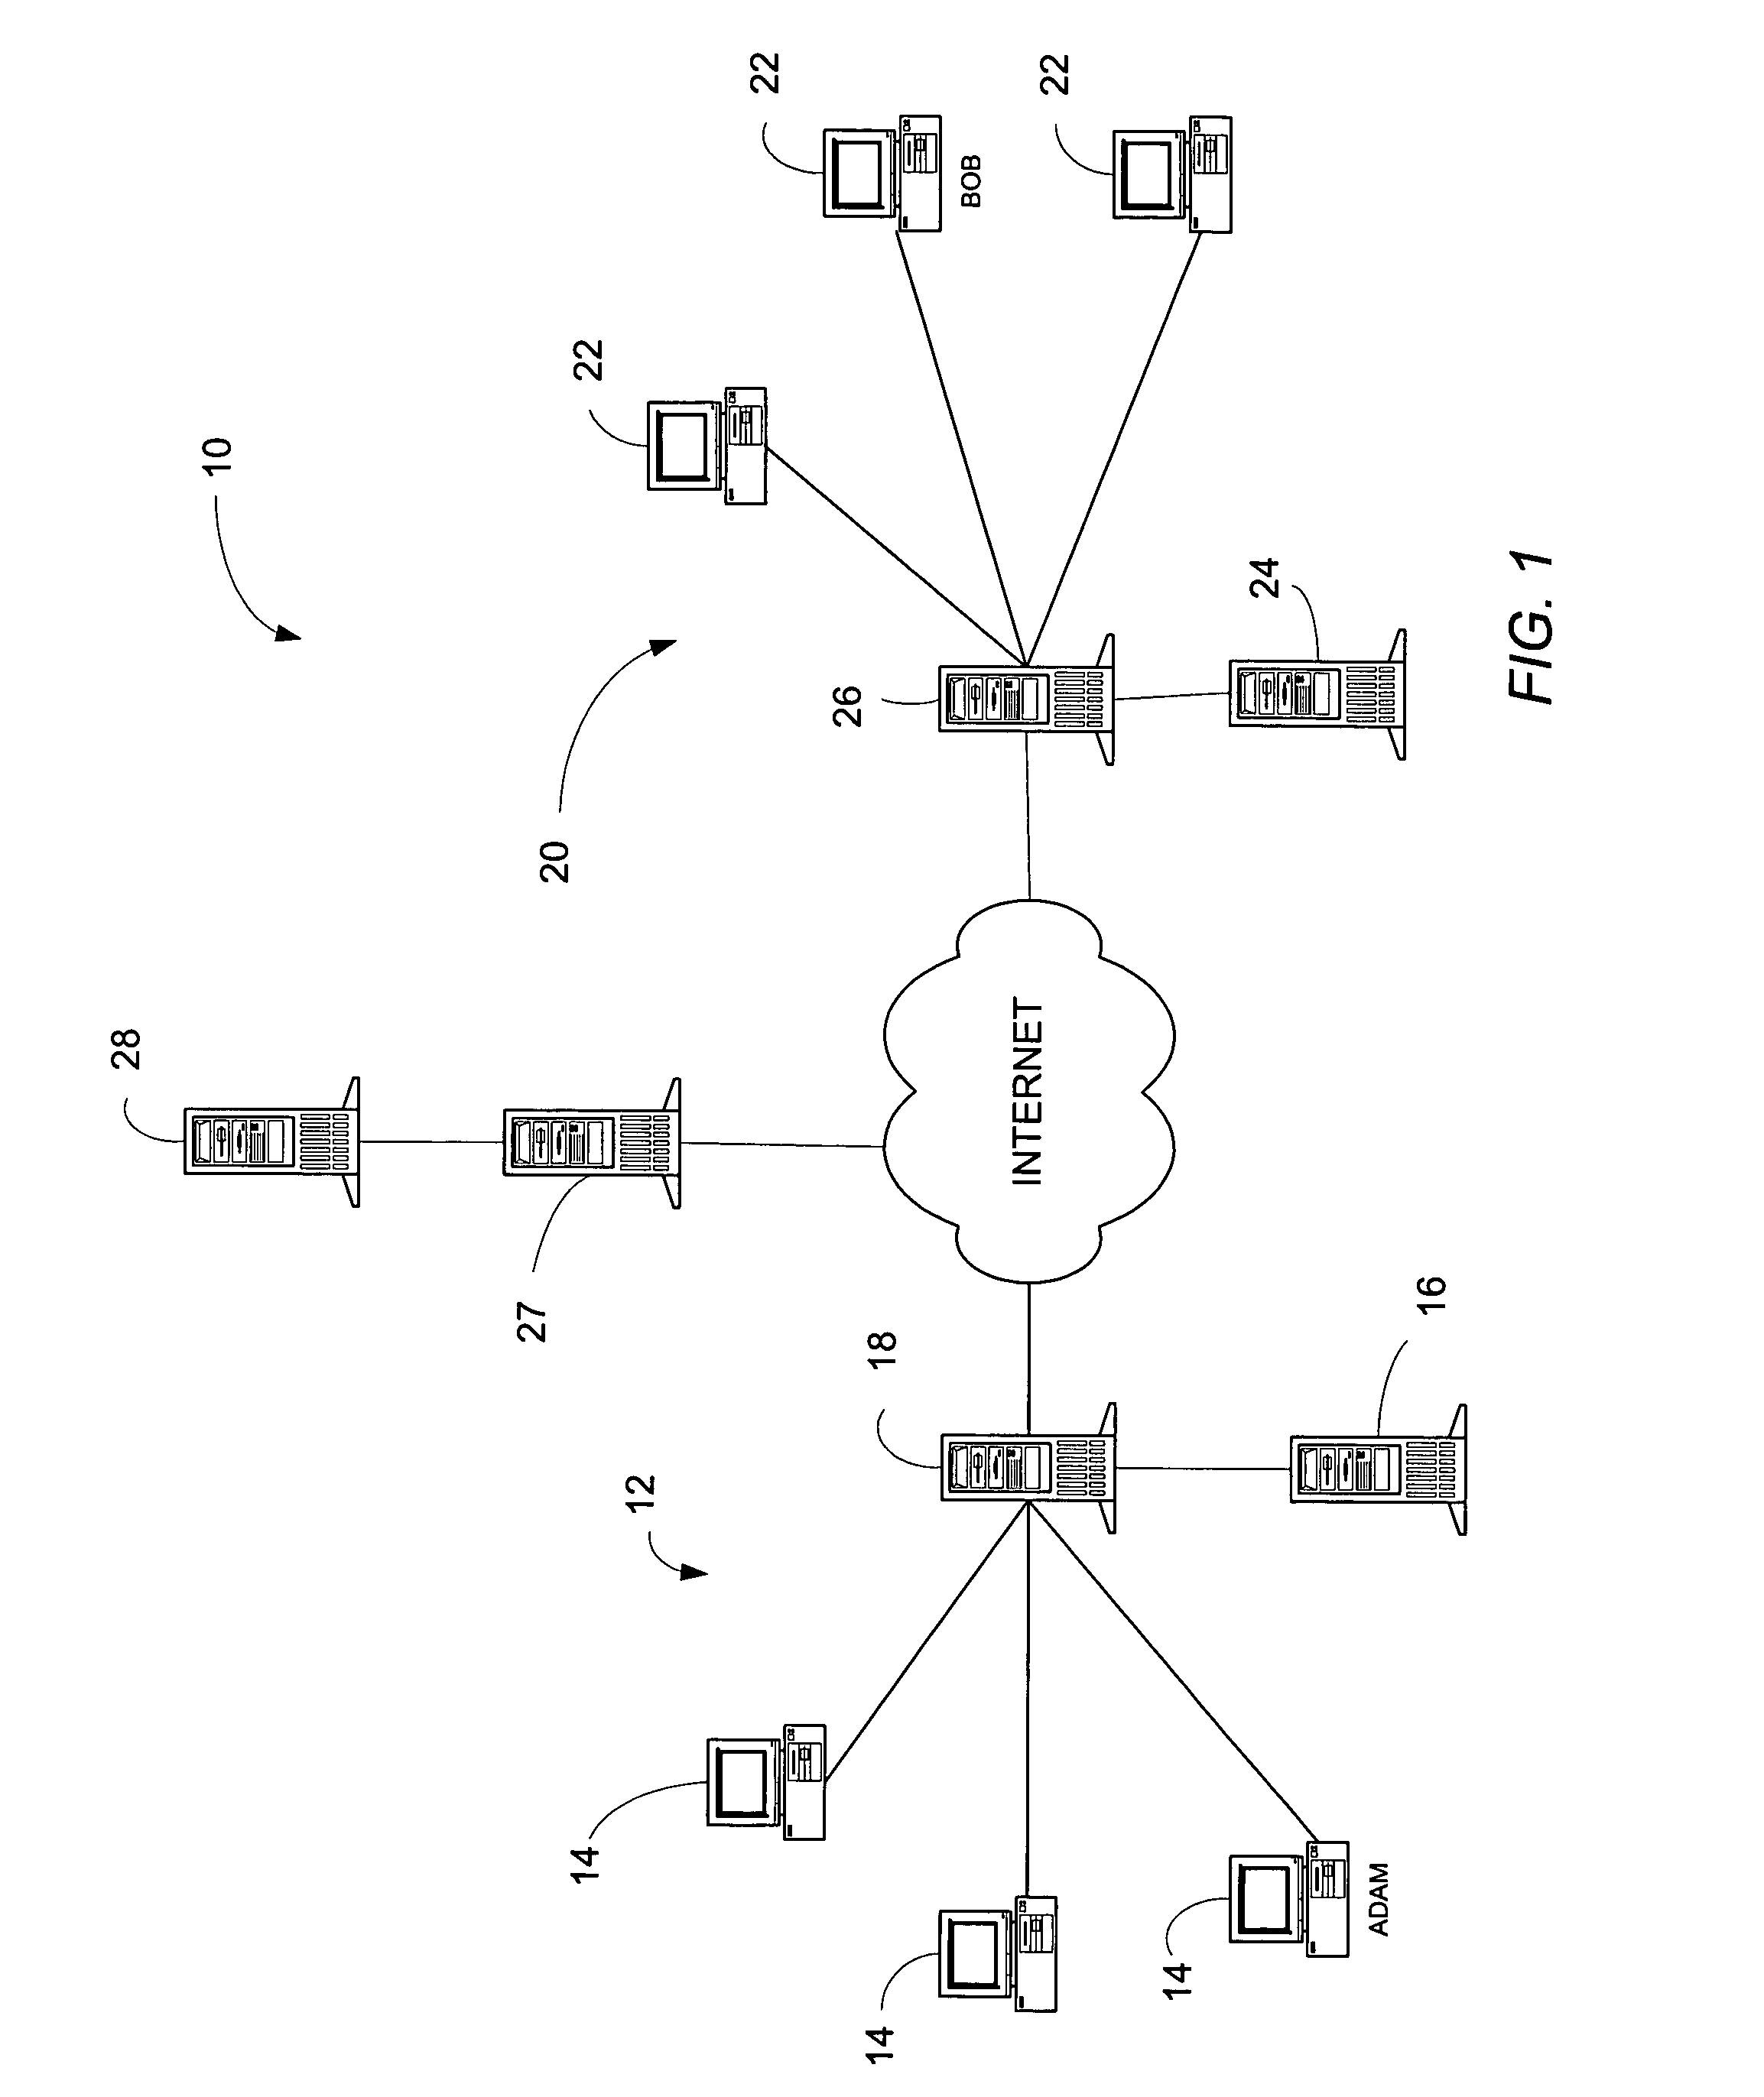 System and method of filtering unwanted electronic mail messages